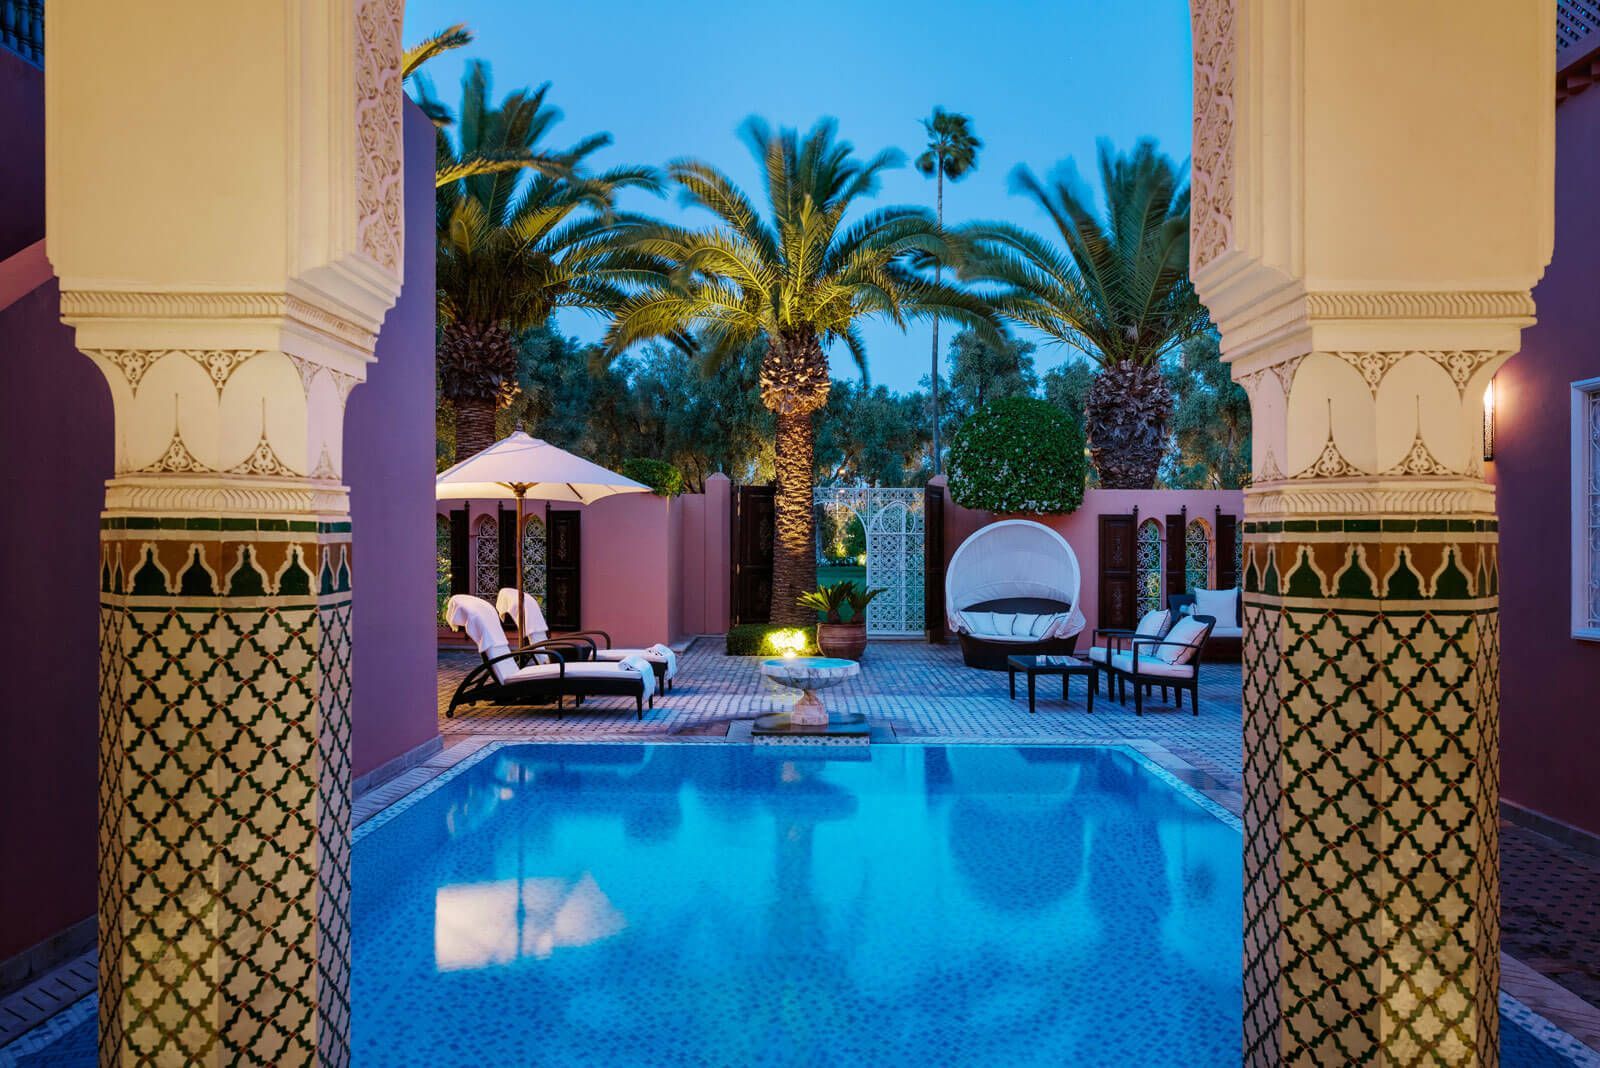 The luxury guide to Marrakech